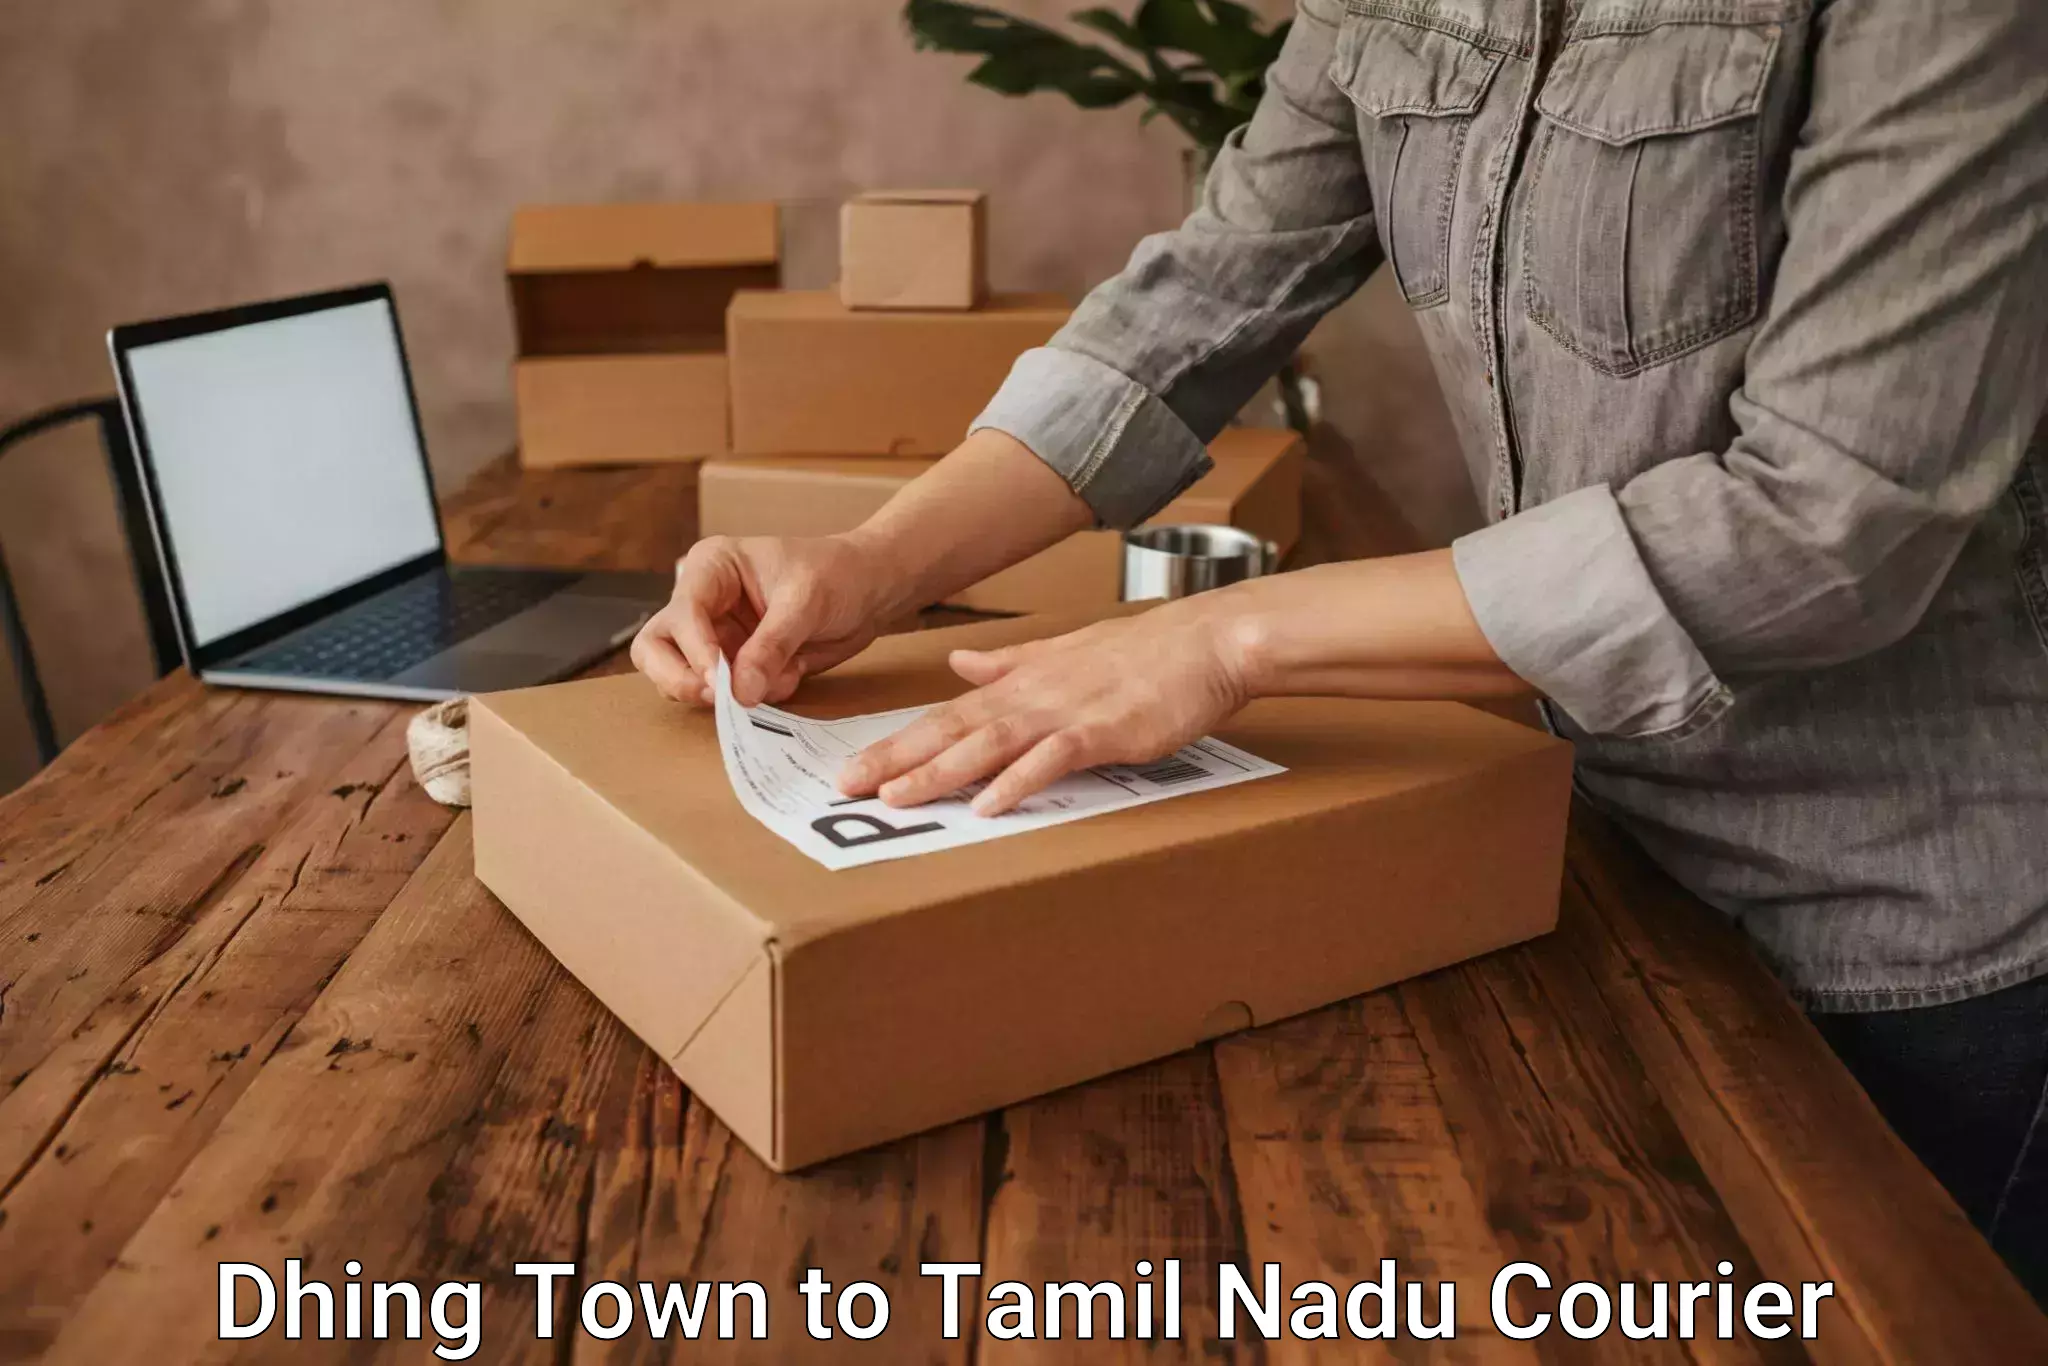 Sustainable courier practices Dhing Town to Tamil Nadu